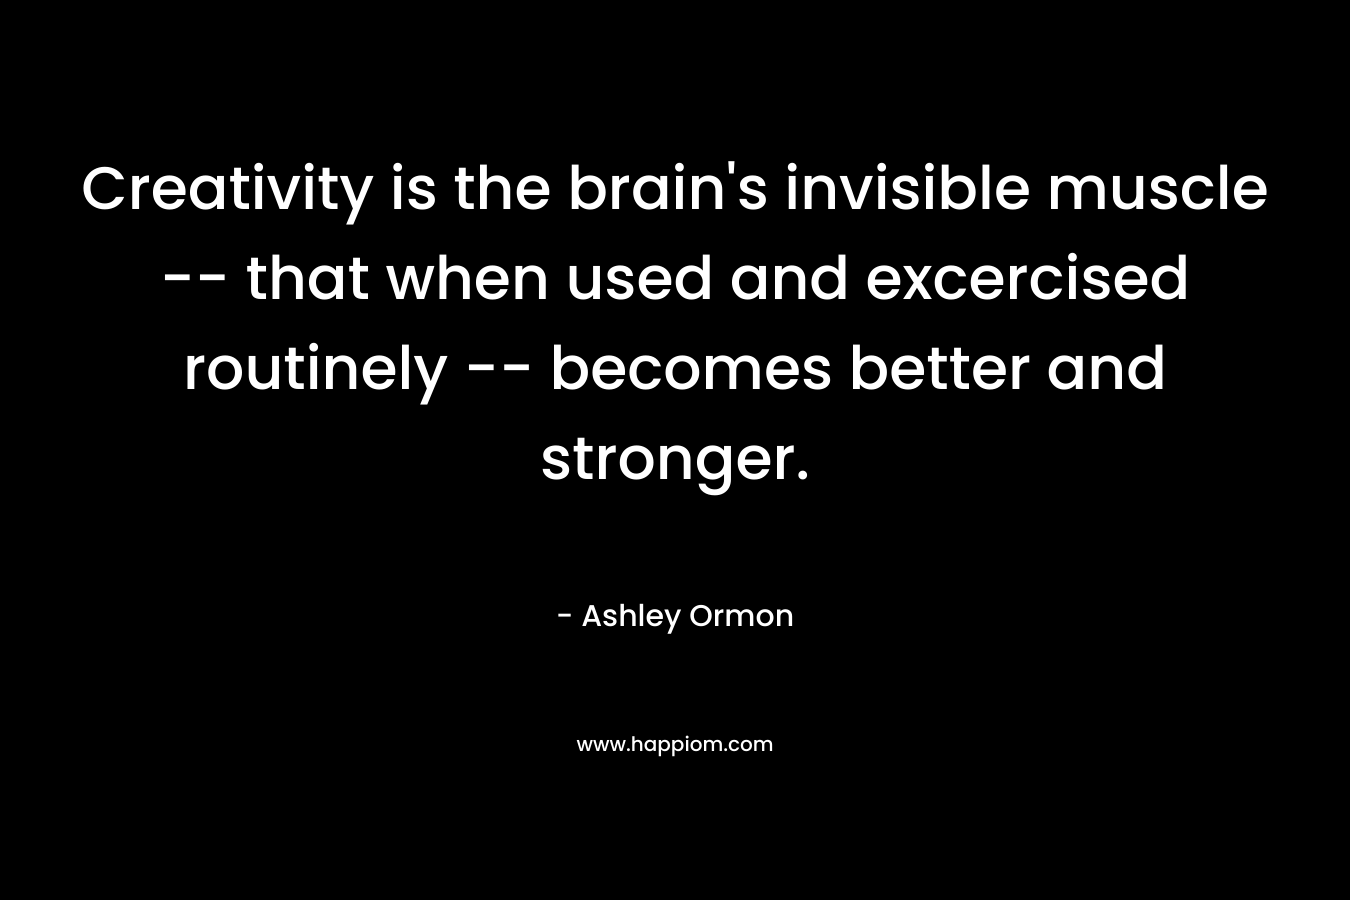 Creativity is the brain's invisible muscle -- that when used and excercised routinely -- becomes better and stronger.